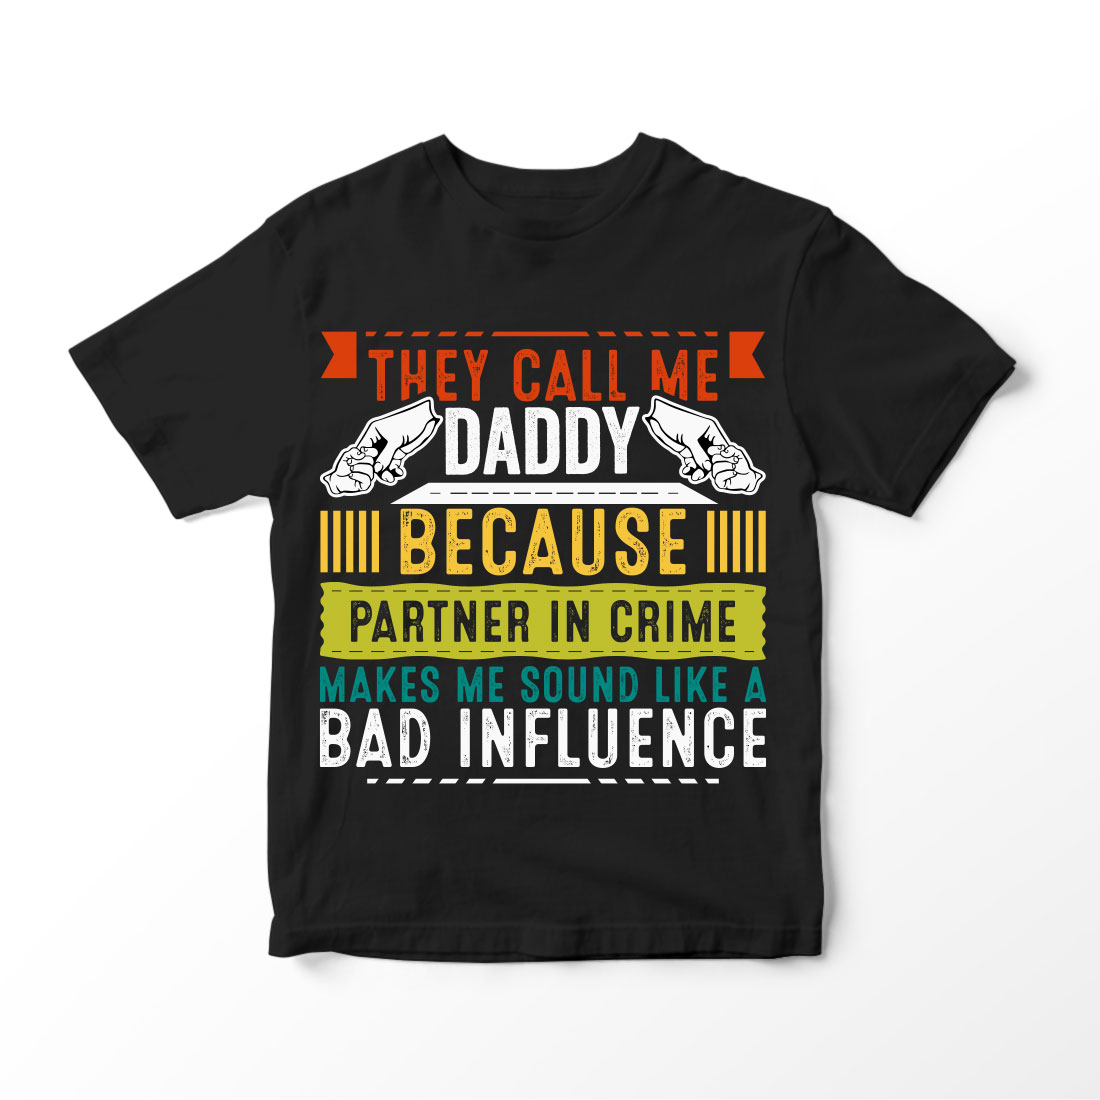 fathers day t shirt dad t shirt design father day tshirt happy fathers day t shirt design ideas dad day papa son fathers day shirt ideas for family 4 881 1